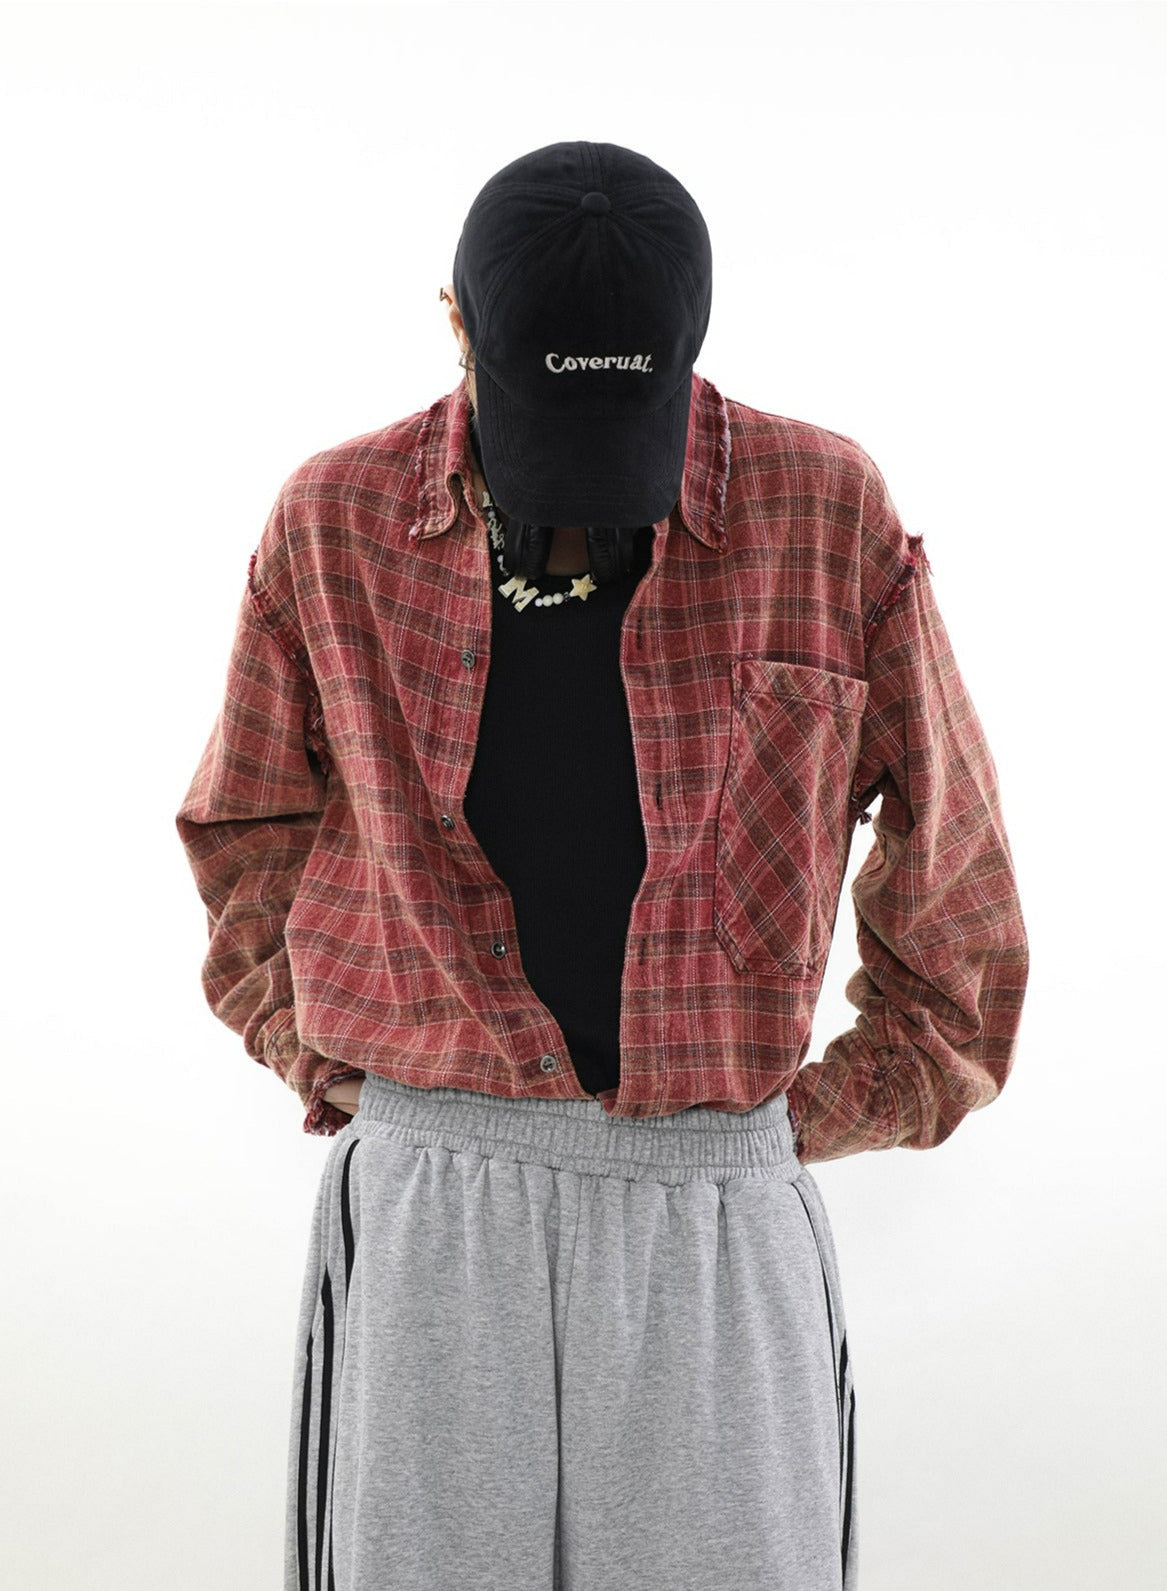 Mr Nearly Vintage Distressed Style Plaid Shirt Korean Street Fashion Shirt By Mr Nearly Shop Online at OH Vault